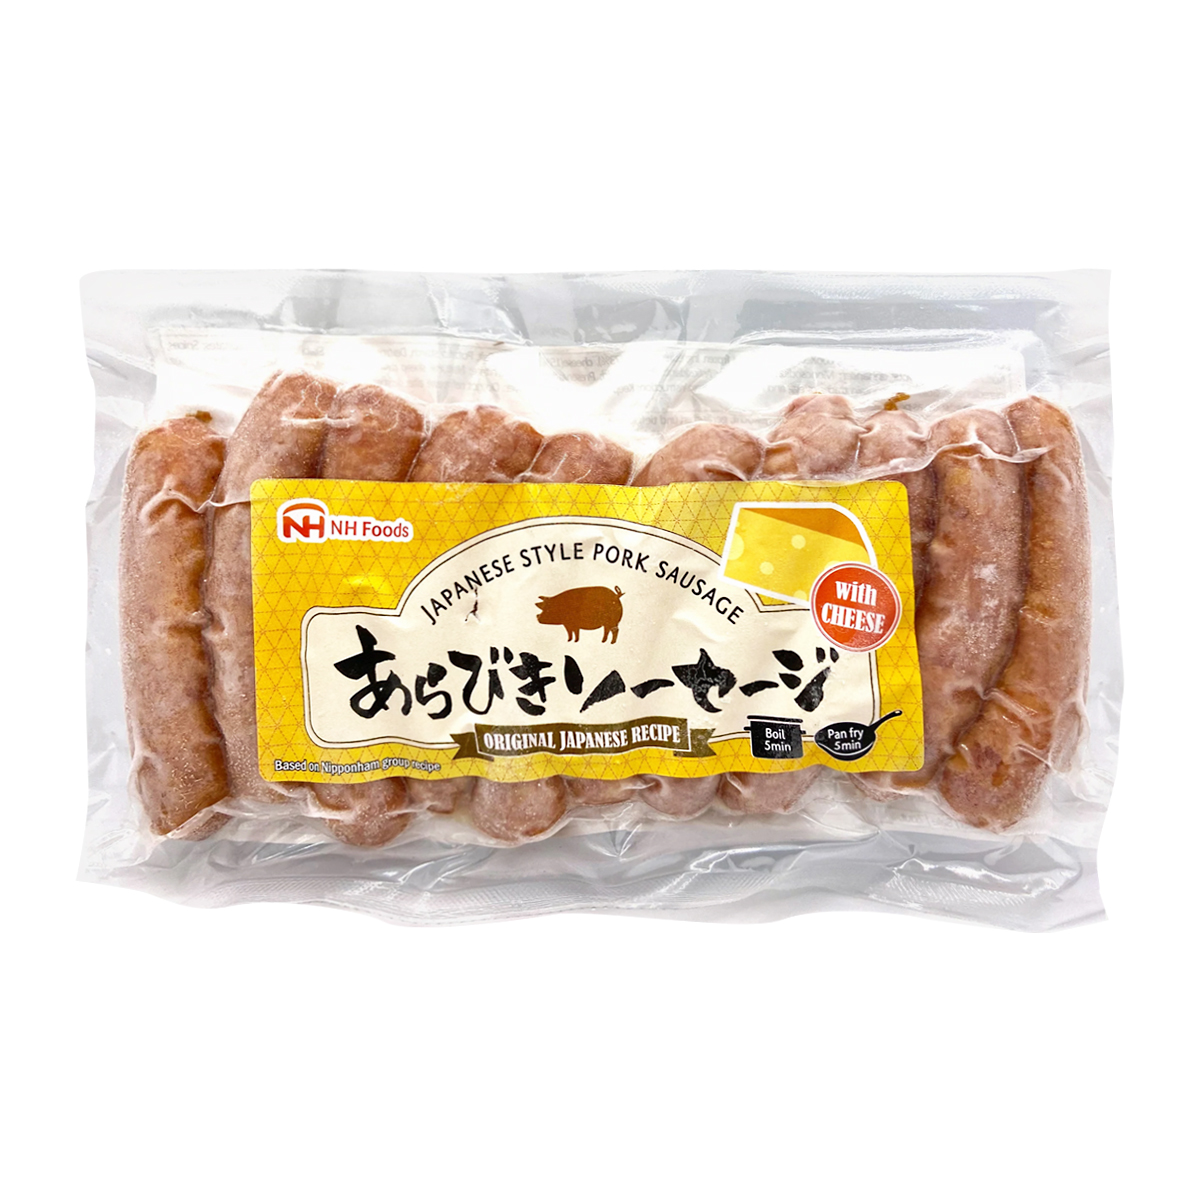 Exclusiv in magazine - Japanese style pork sausage with cheese 185g, asianfood.ro